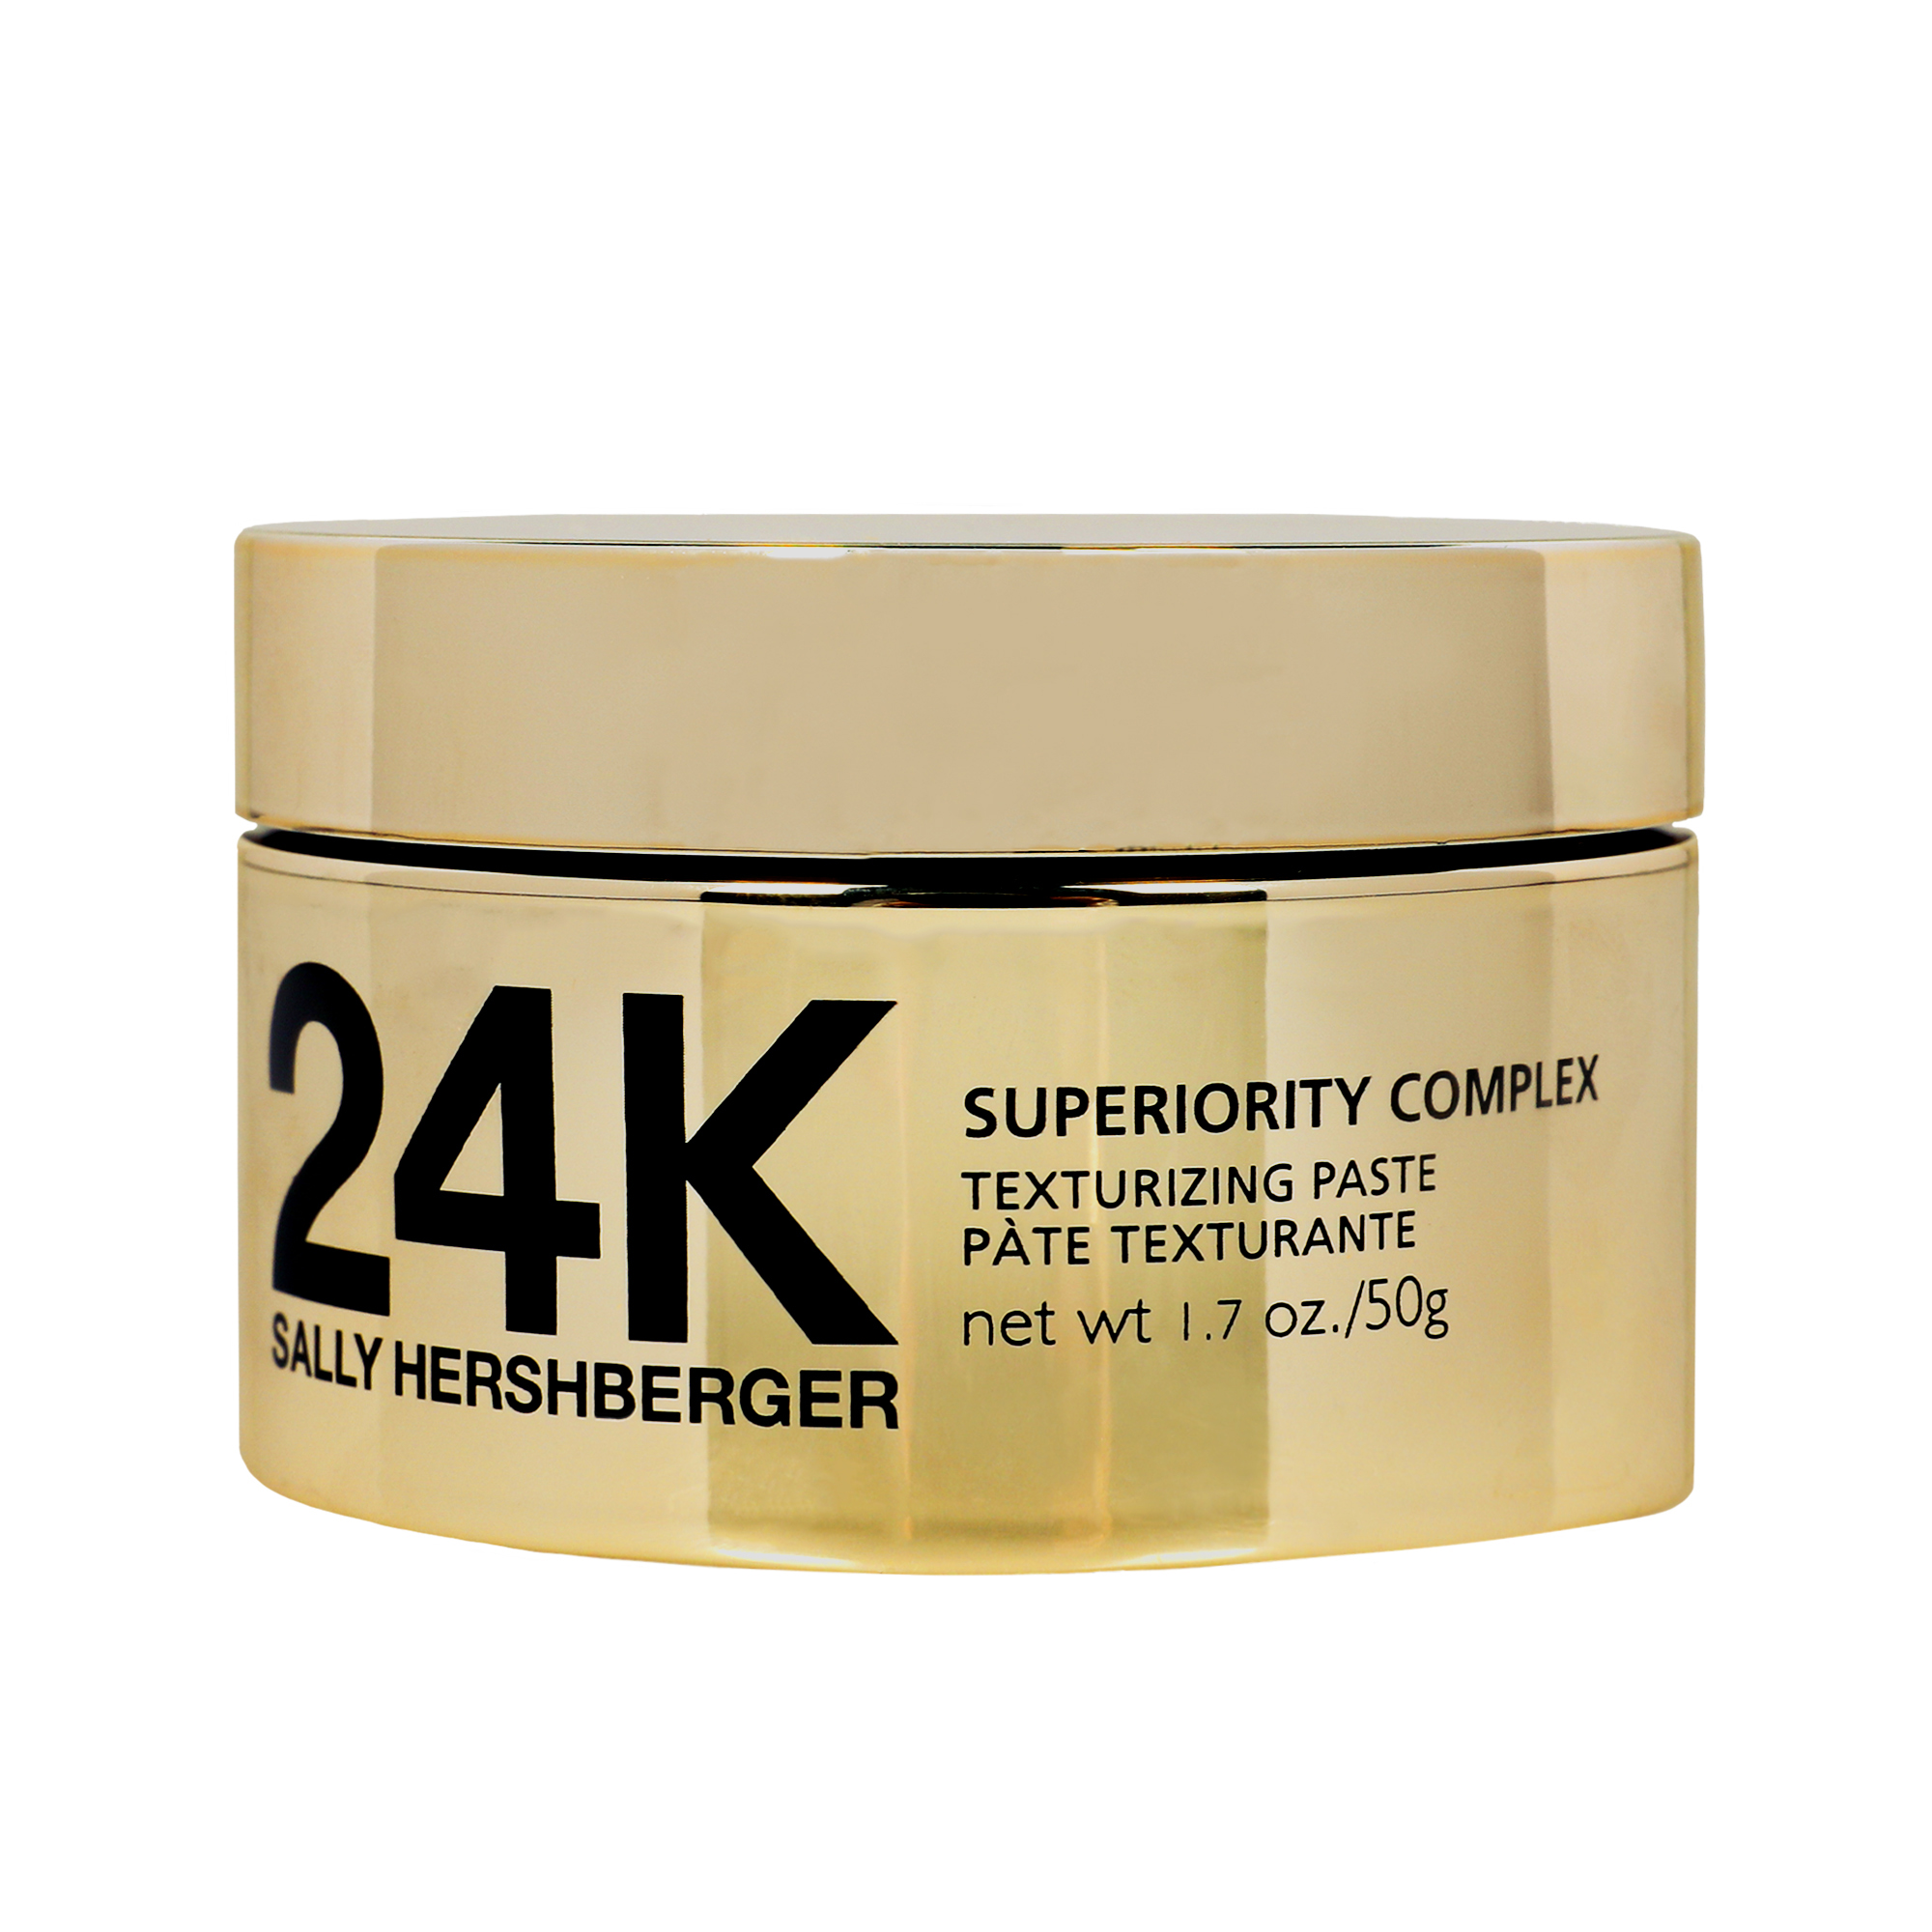 Sally Hershberger 24K Superiority Complex Texturizing Hair Paste, 1.7 oz - image 1 of 8